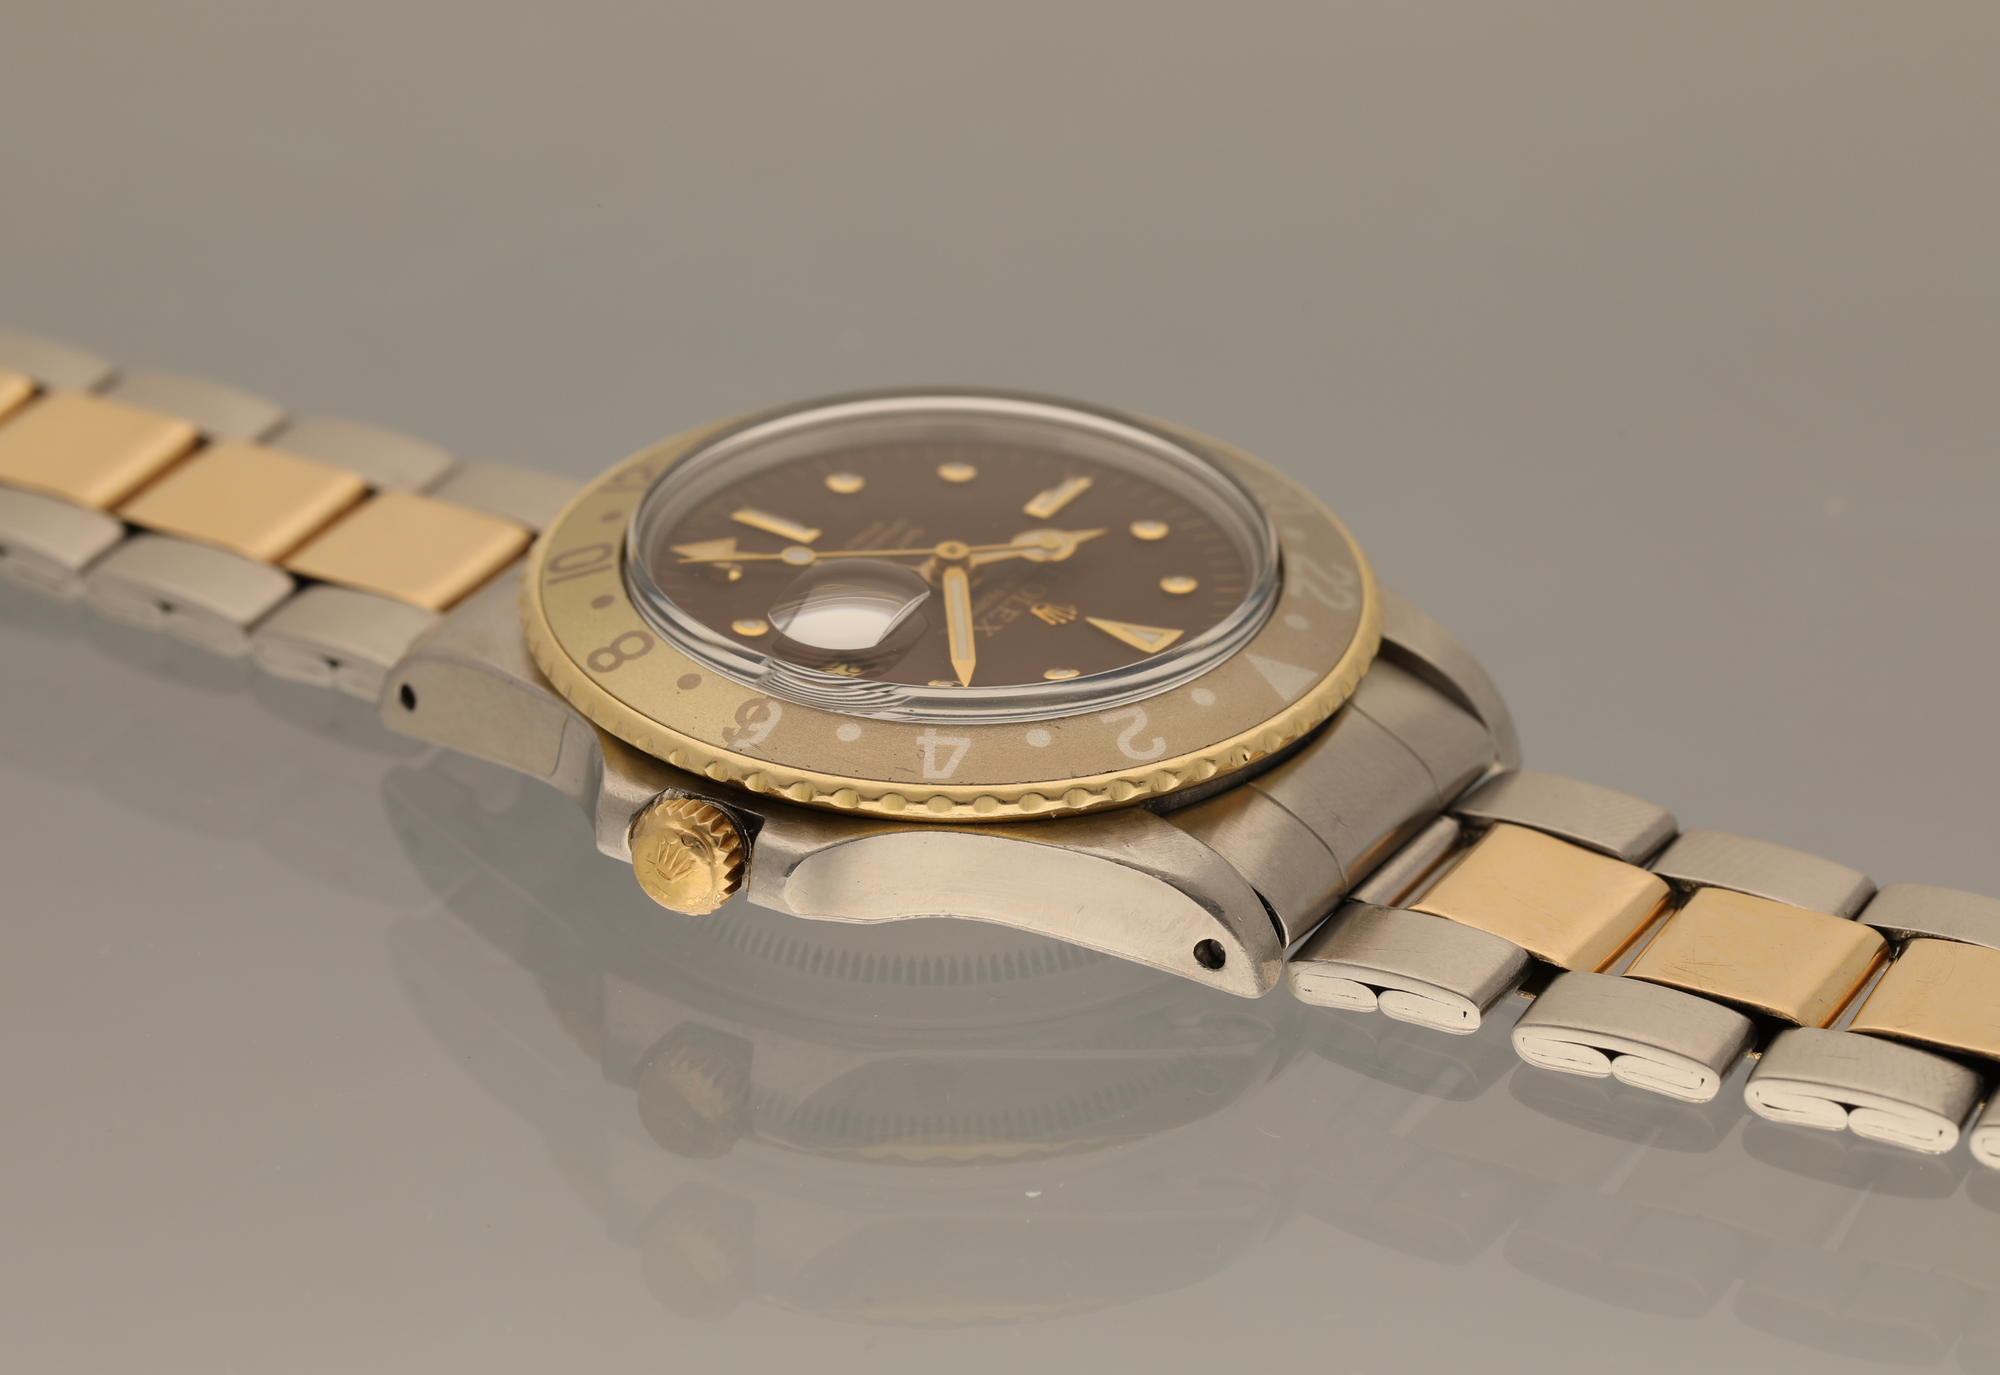 Rolex RootBeer 1675 from 1977